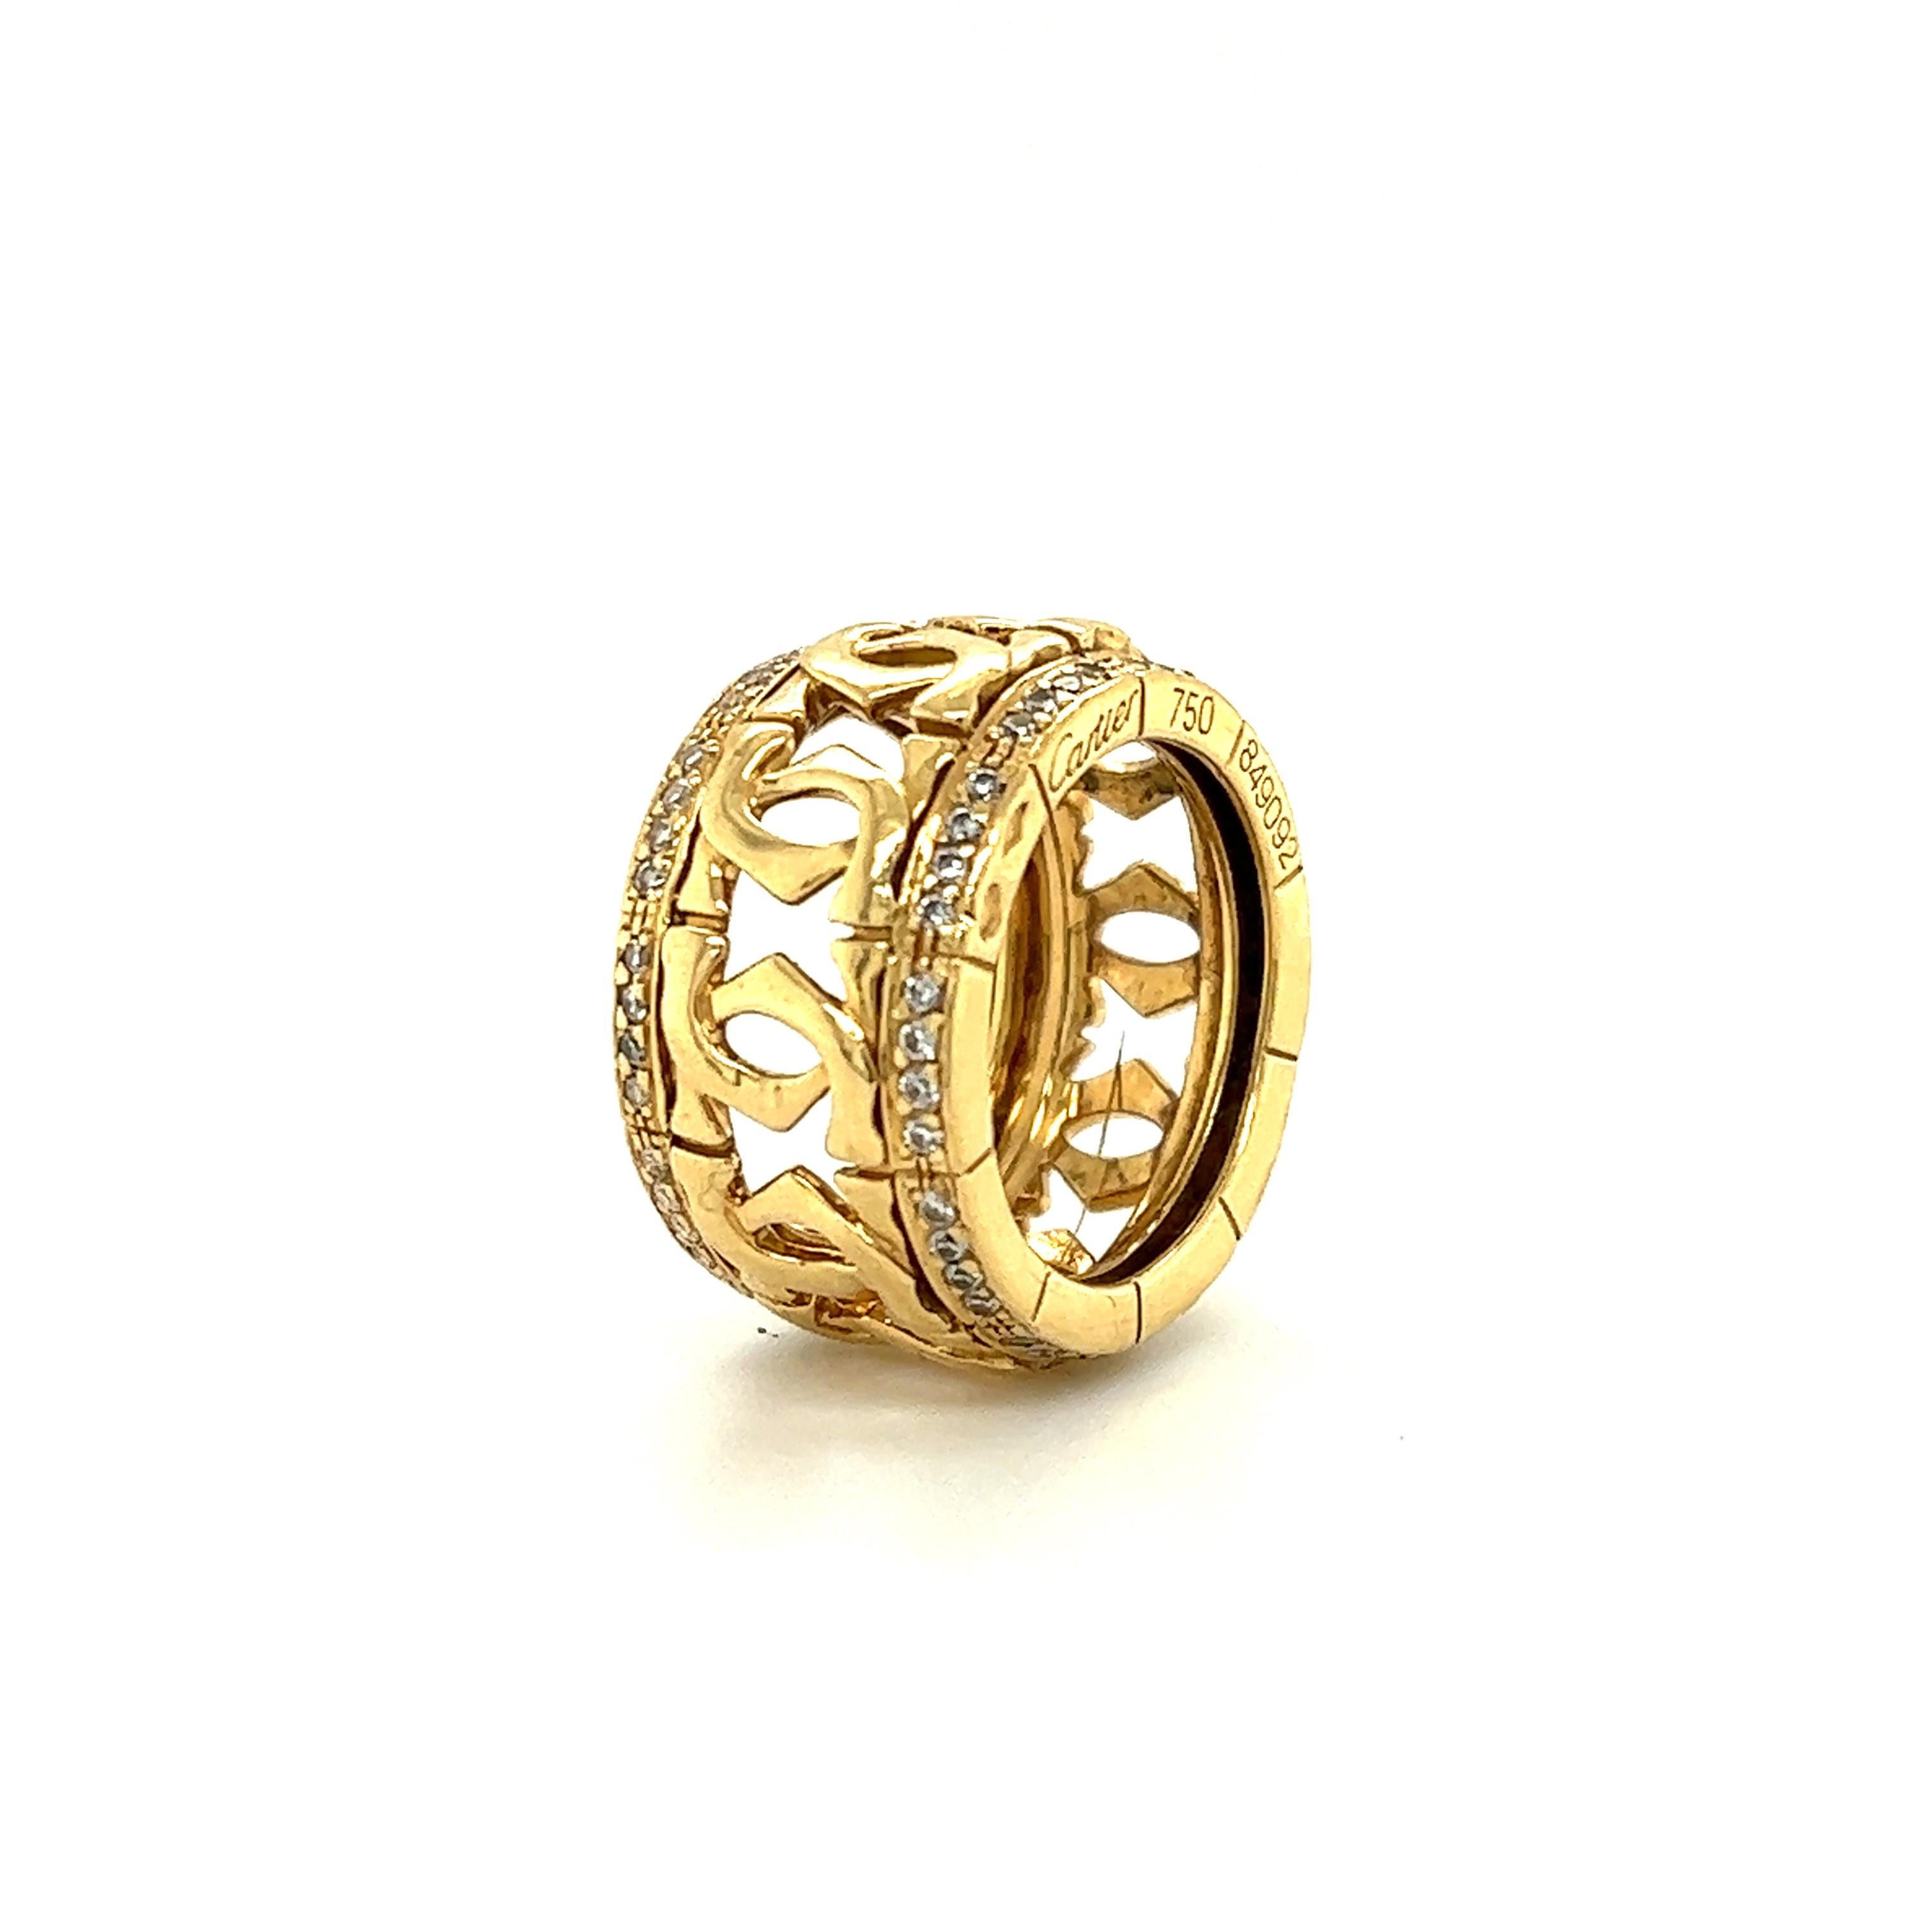 Gorgeous vintage ring from famed designer Cartier. The ring is crafted in 18k yellow gold and is a wide band design. The ring shows a 12.75 mm width.
The ring shows the double C pattern throughout the center of the ring, with accenting round